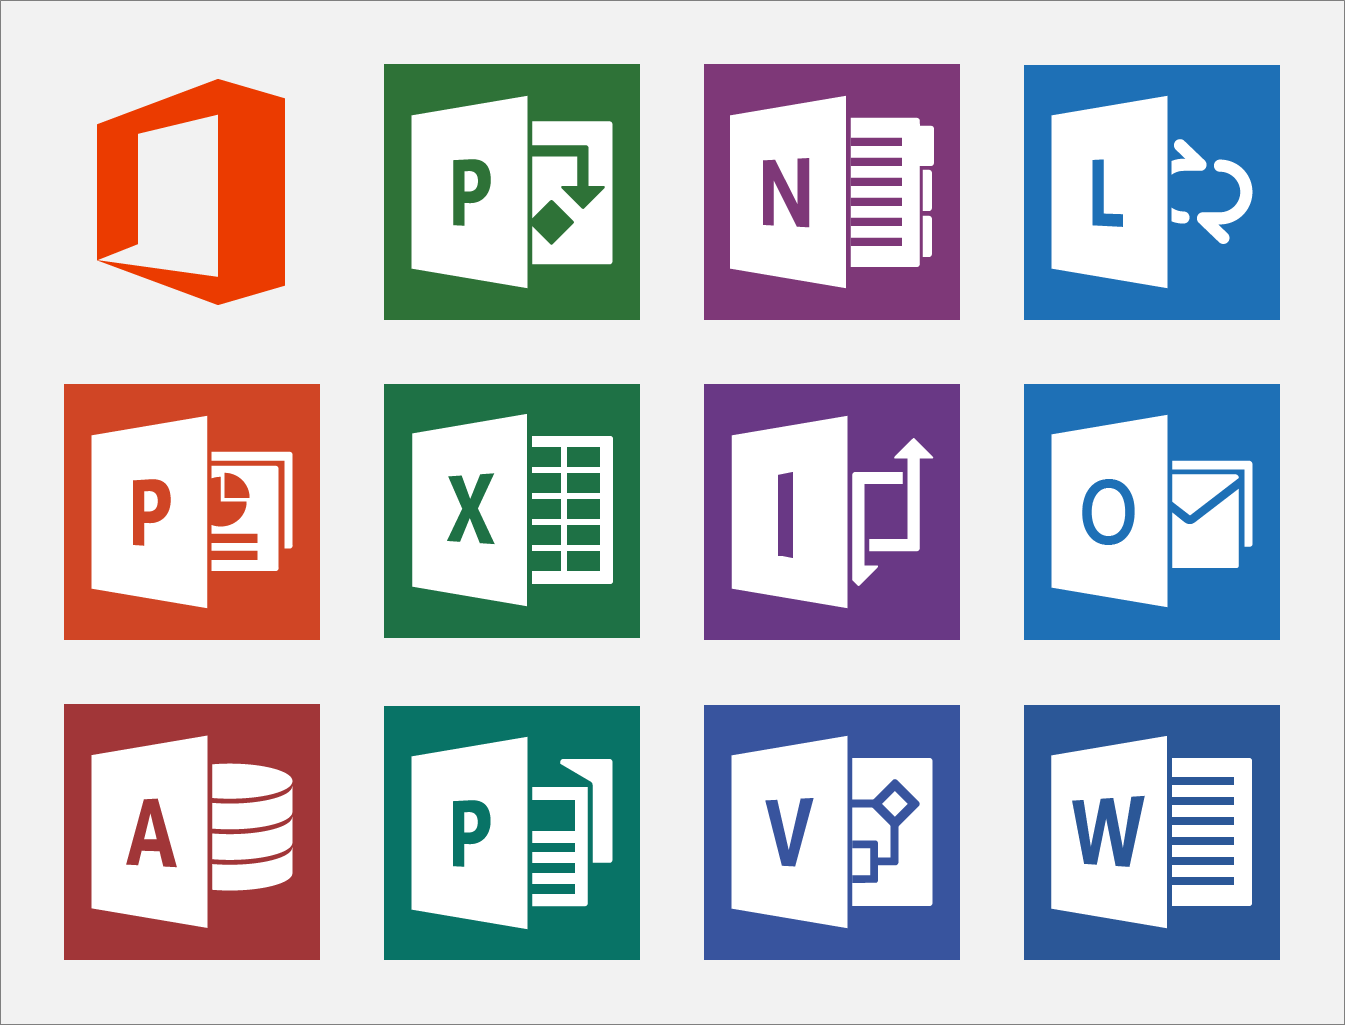 Microsoft Office 365 Application Logo - Pin by Krystle Chanel on Infographics, Logos & Pictograms ...